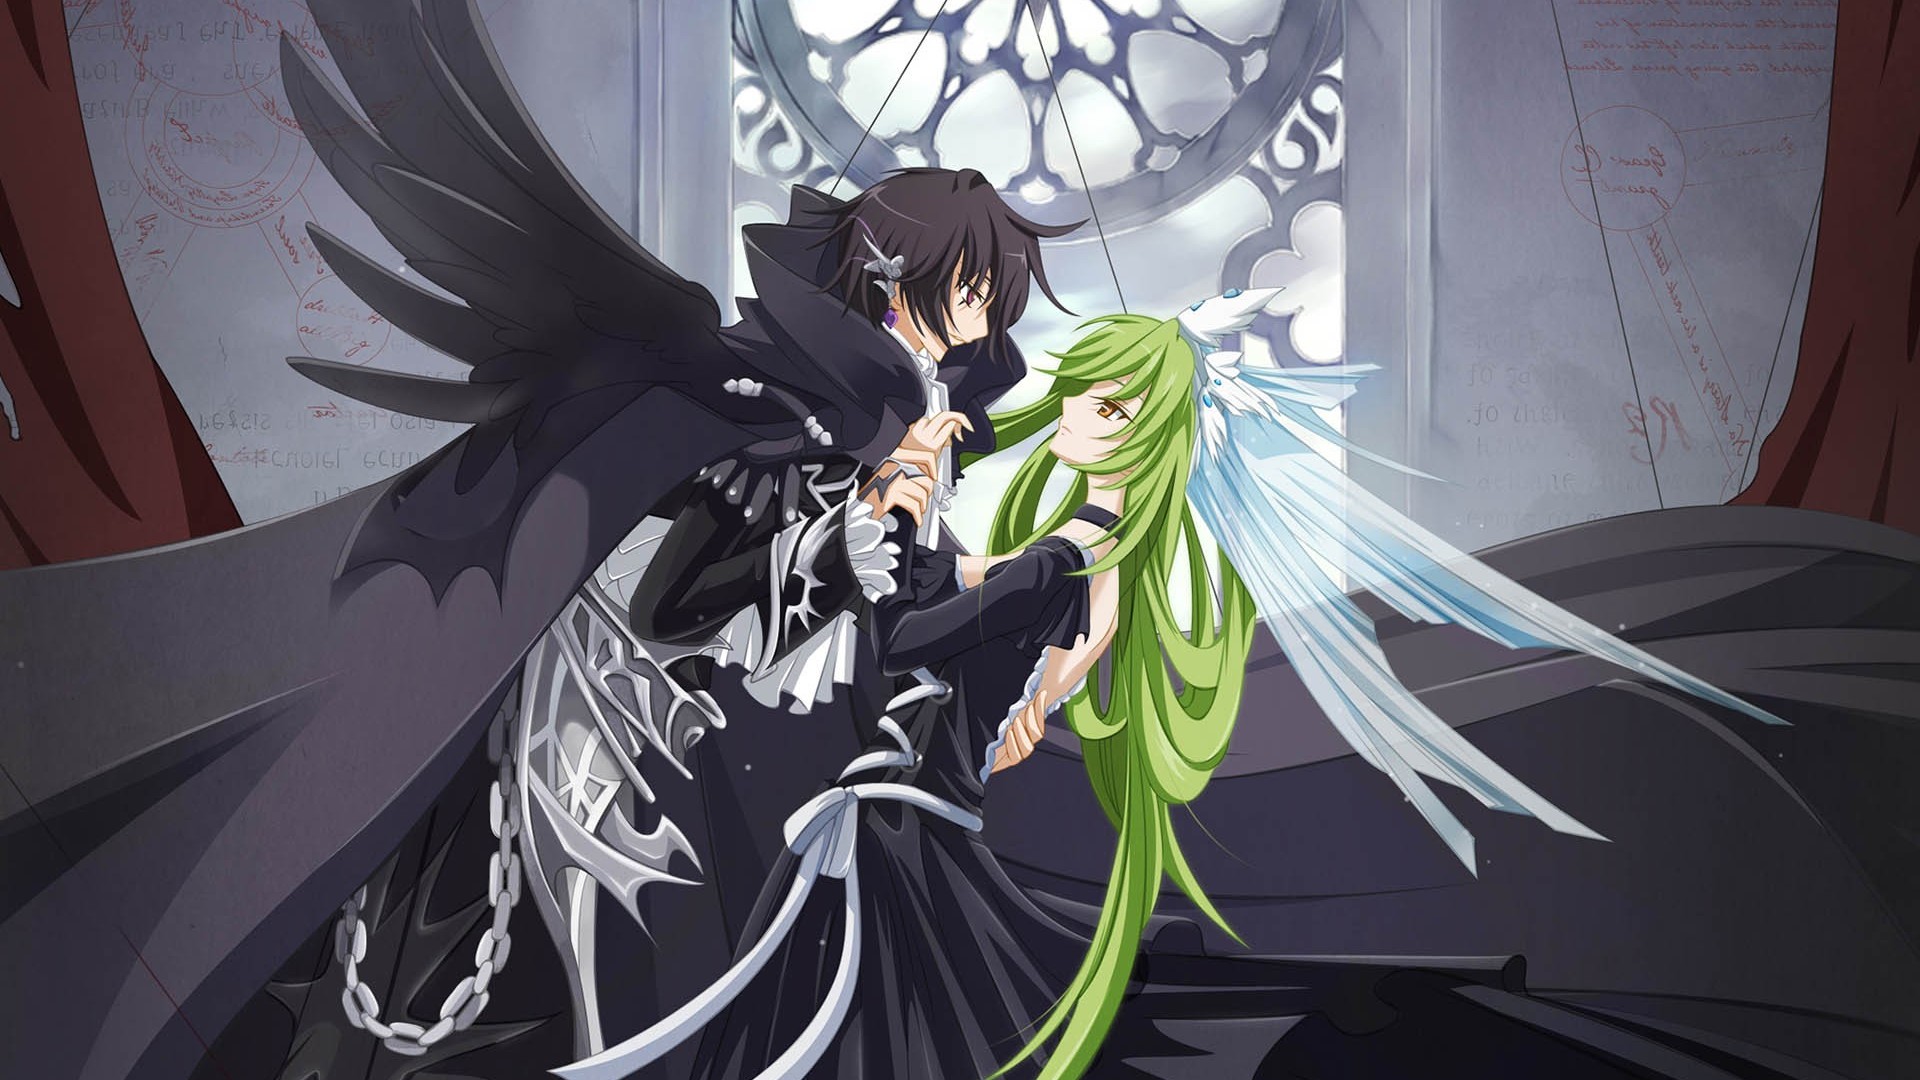 Free Download Download Lelouch Lamperouge And Cc Code Geass Wallpaper 19x1080 For Your Desktop Mobile Tablet Explore 76 Lelouch Wallpaper Code Geass Lelouch Wallpaper